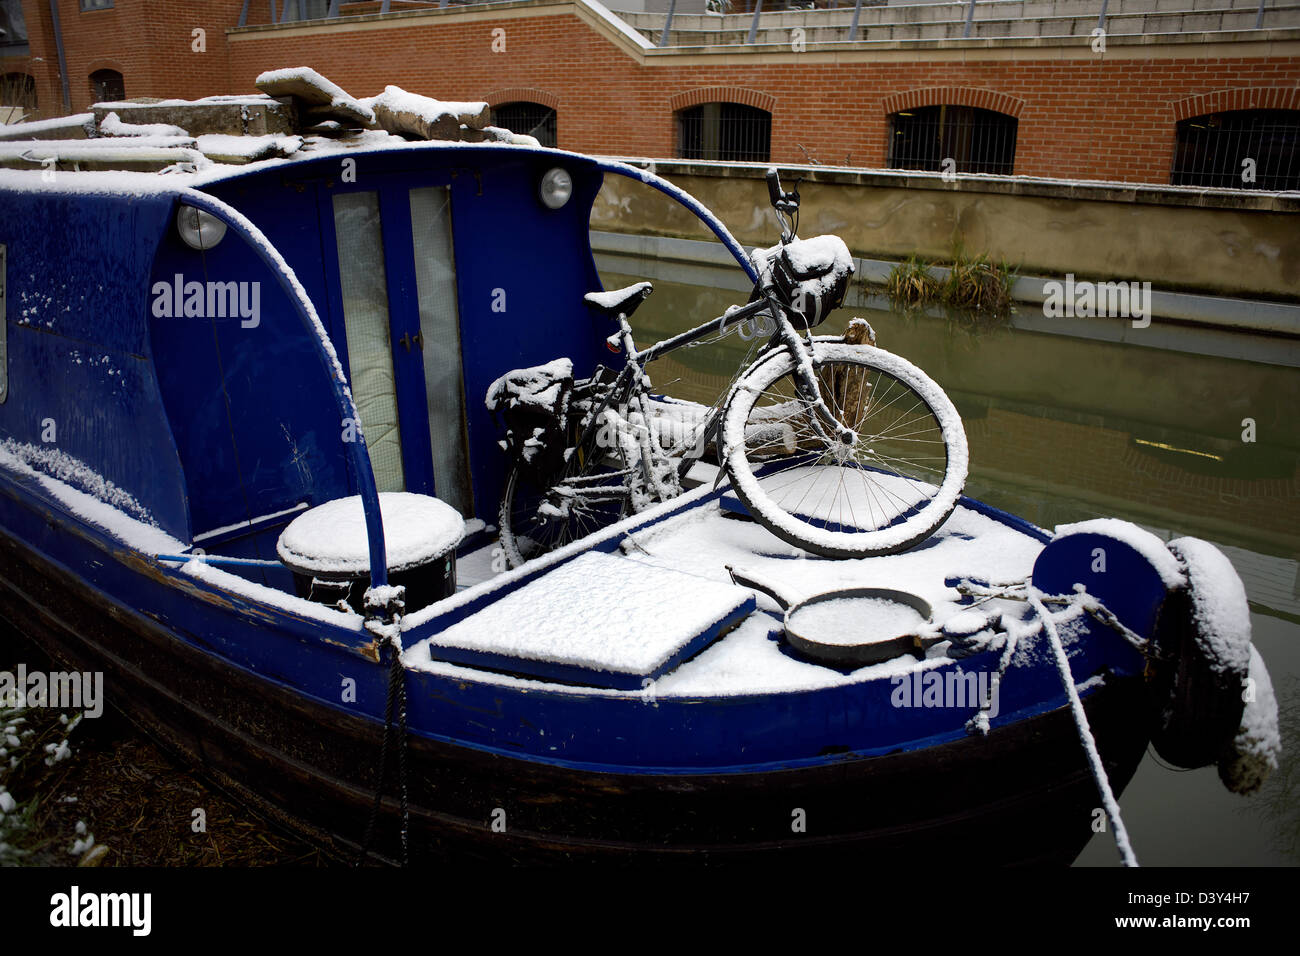 Snow, narrowboat and bicycle, winter on the South Oxford Canal, City of Oxford, Oxfordshire, Oxon, England, boat, narrowboat, Stock Photo